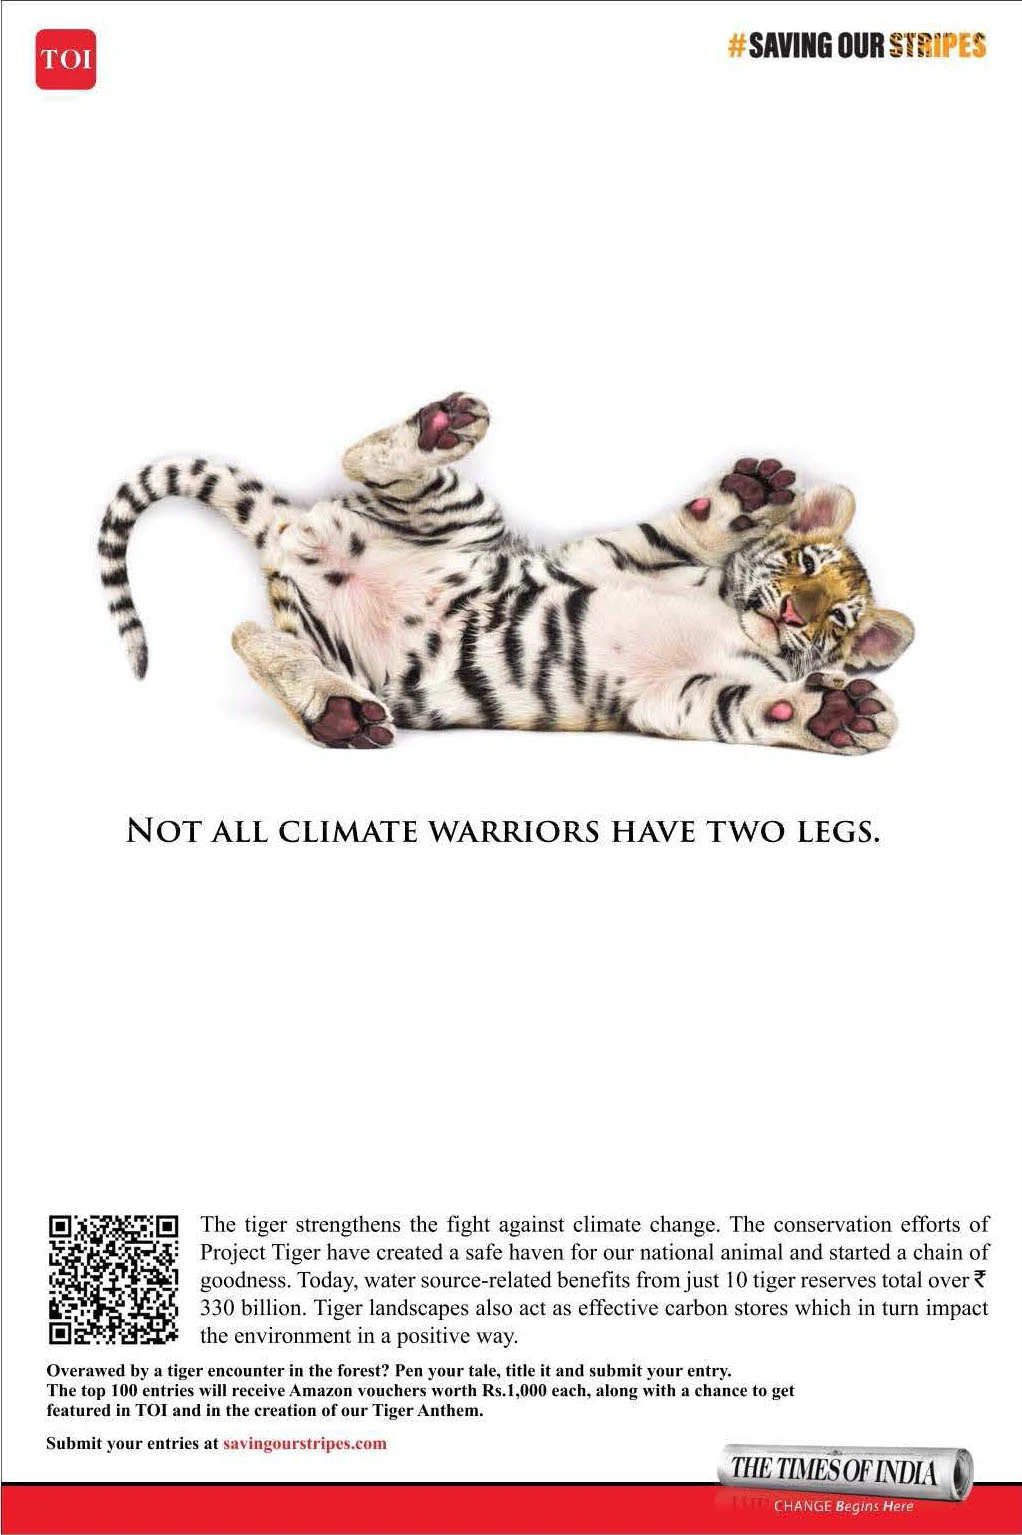 The Power of Clean Newspaper Advertisements A Look at Project Tiger's Campaign